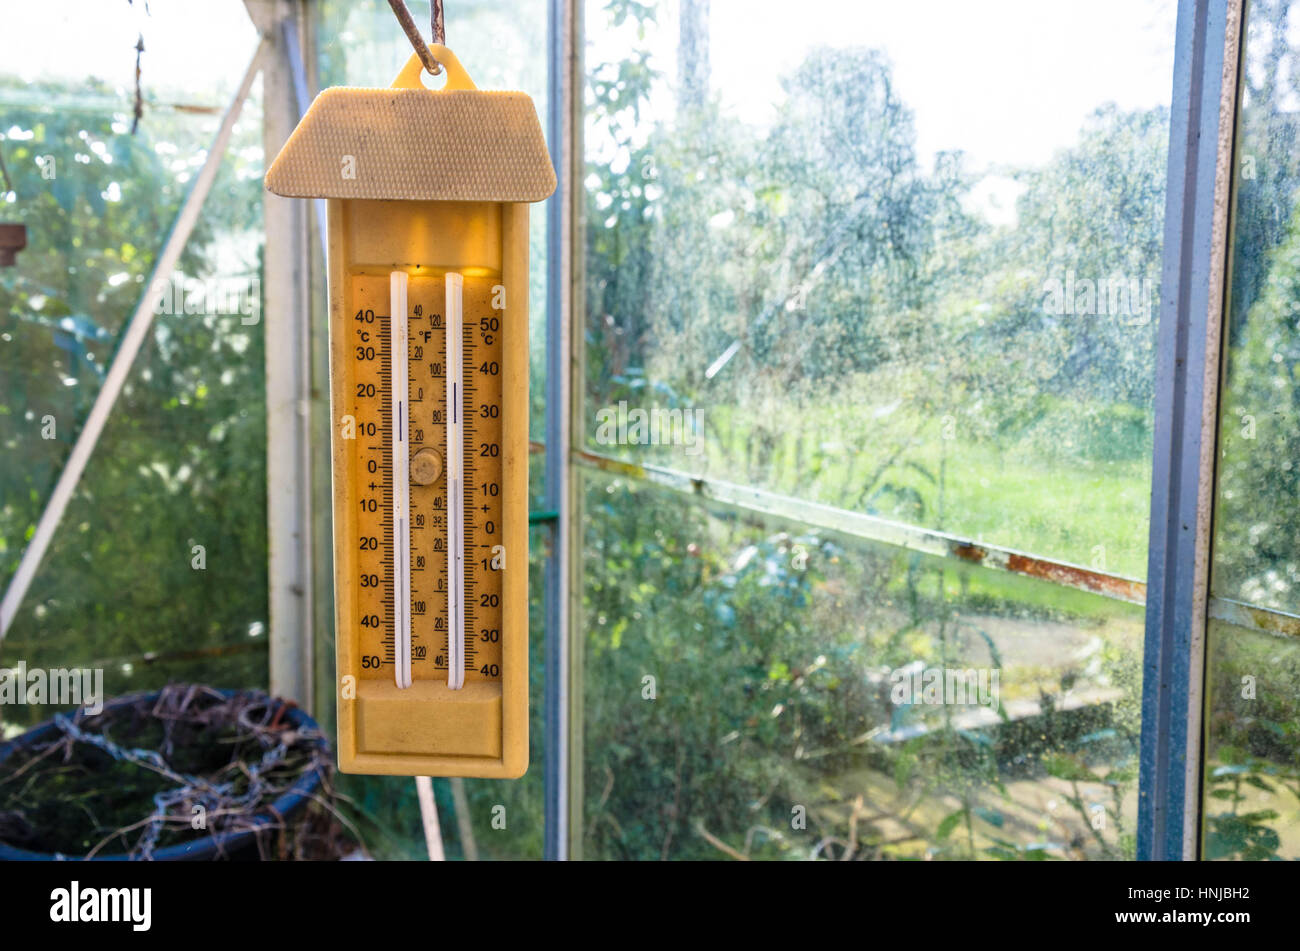 Digital Max Min Greenhouse Thermometer - Max Min Thermometer to Measure  Maximum and Minimum Temperatures in a Greenhouse